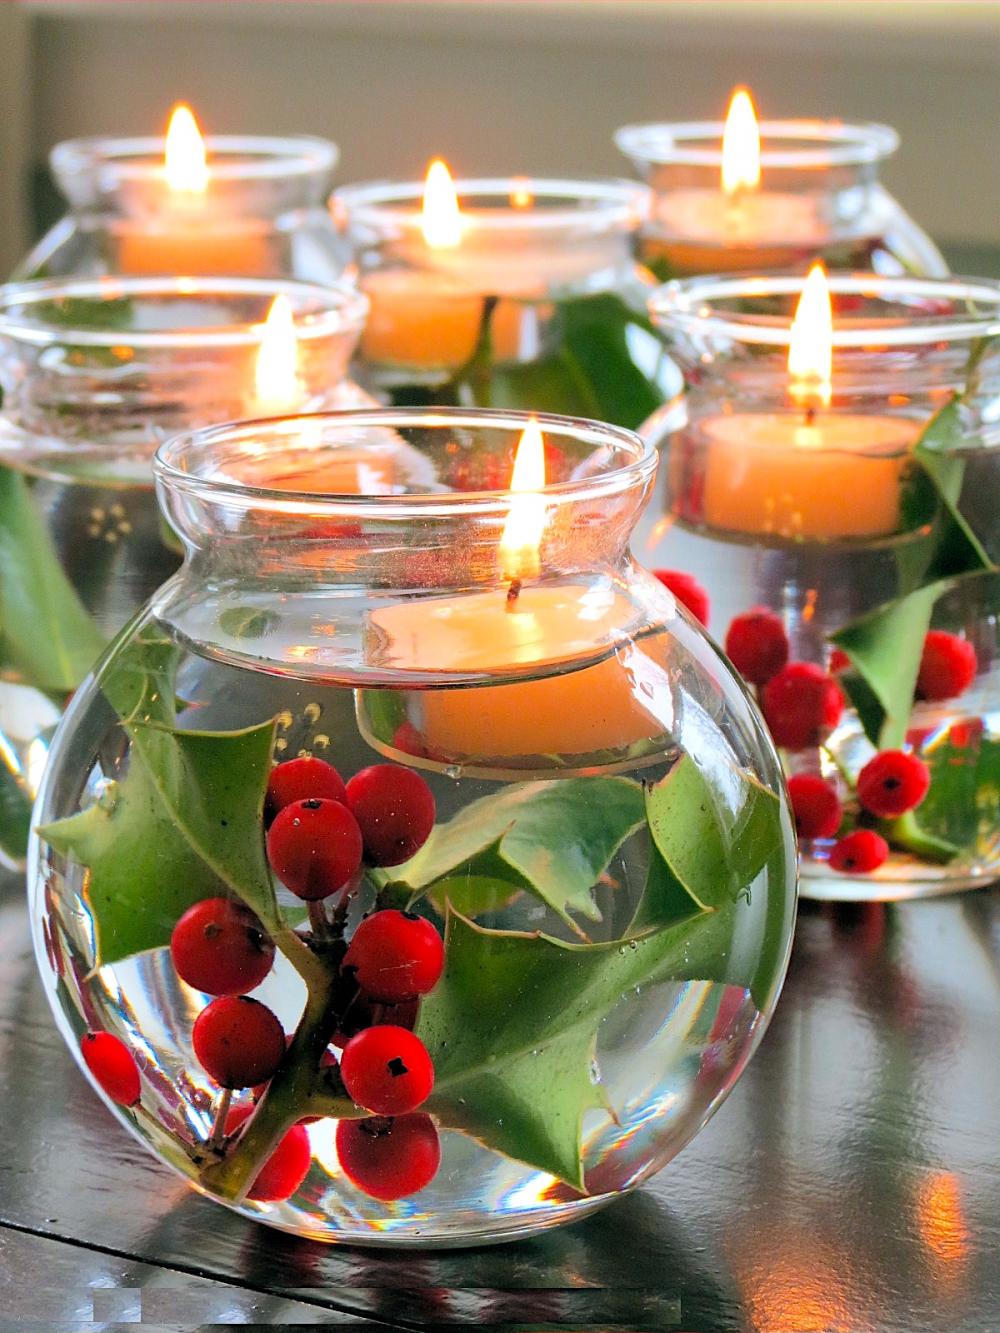 Simple and great ideas for Christmas decorations